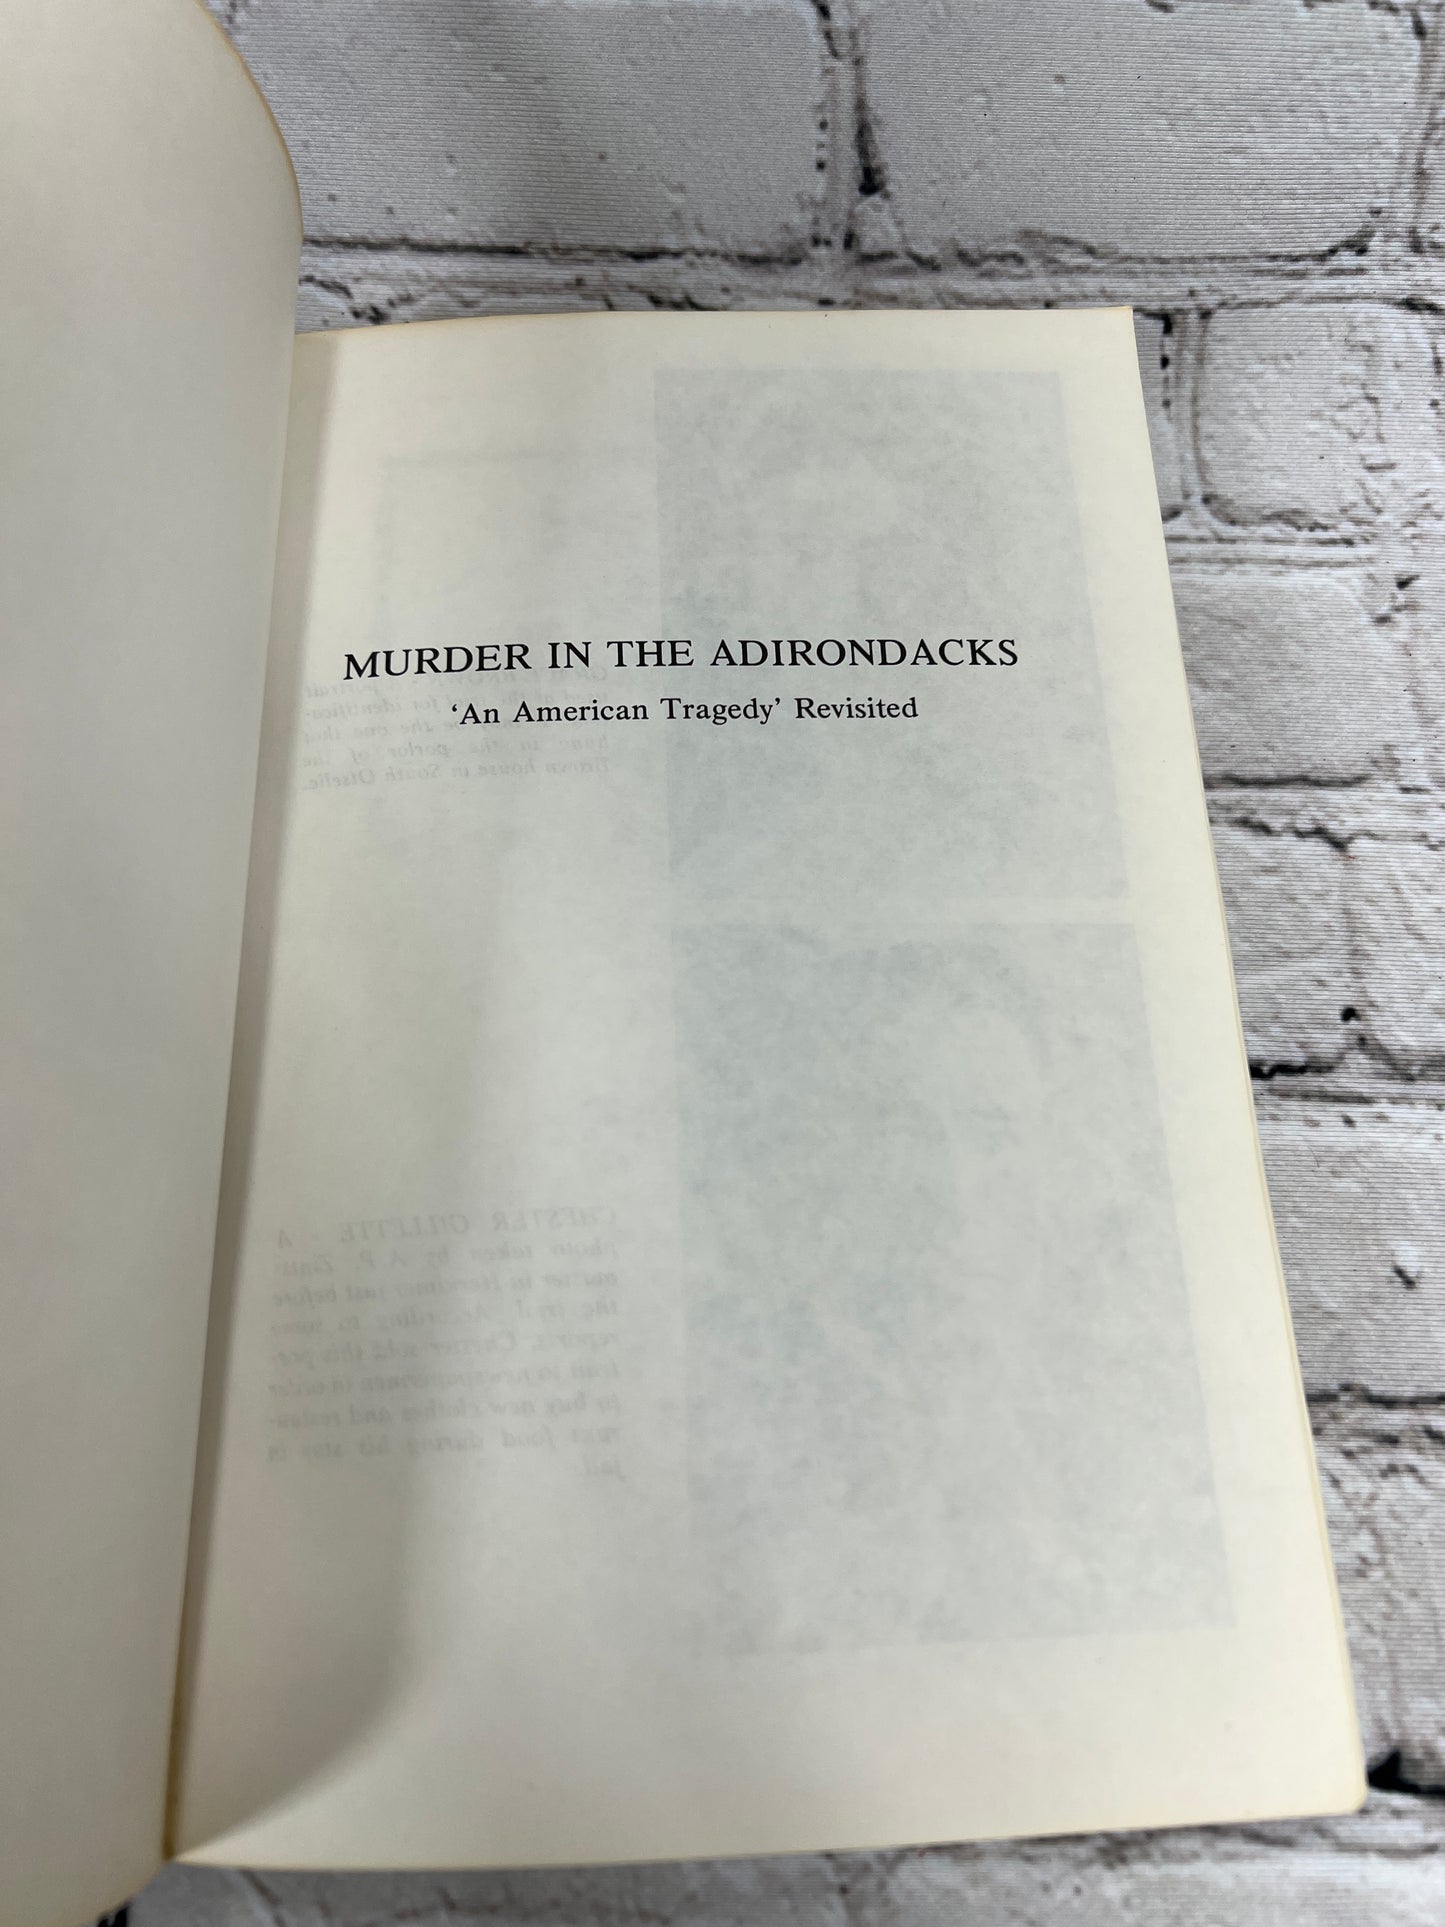 Murder in the Adirondacks: An American Tragedy Revisited by Craig Brandon [1993]